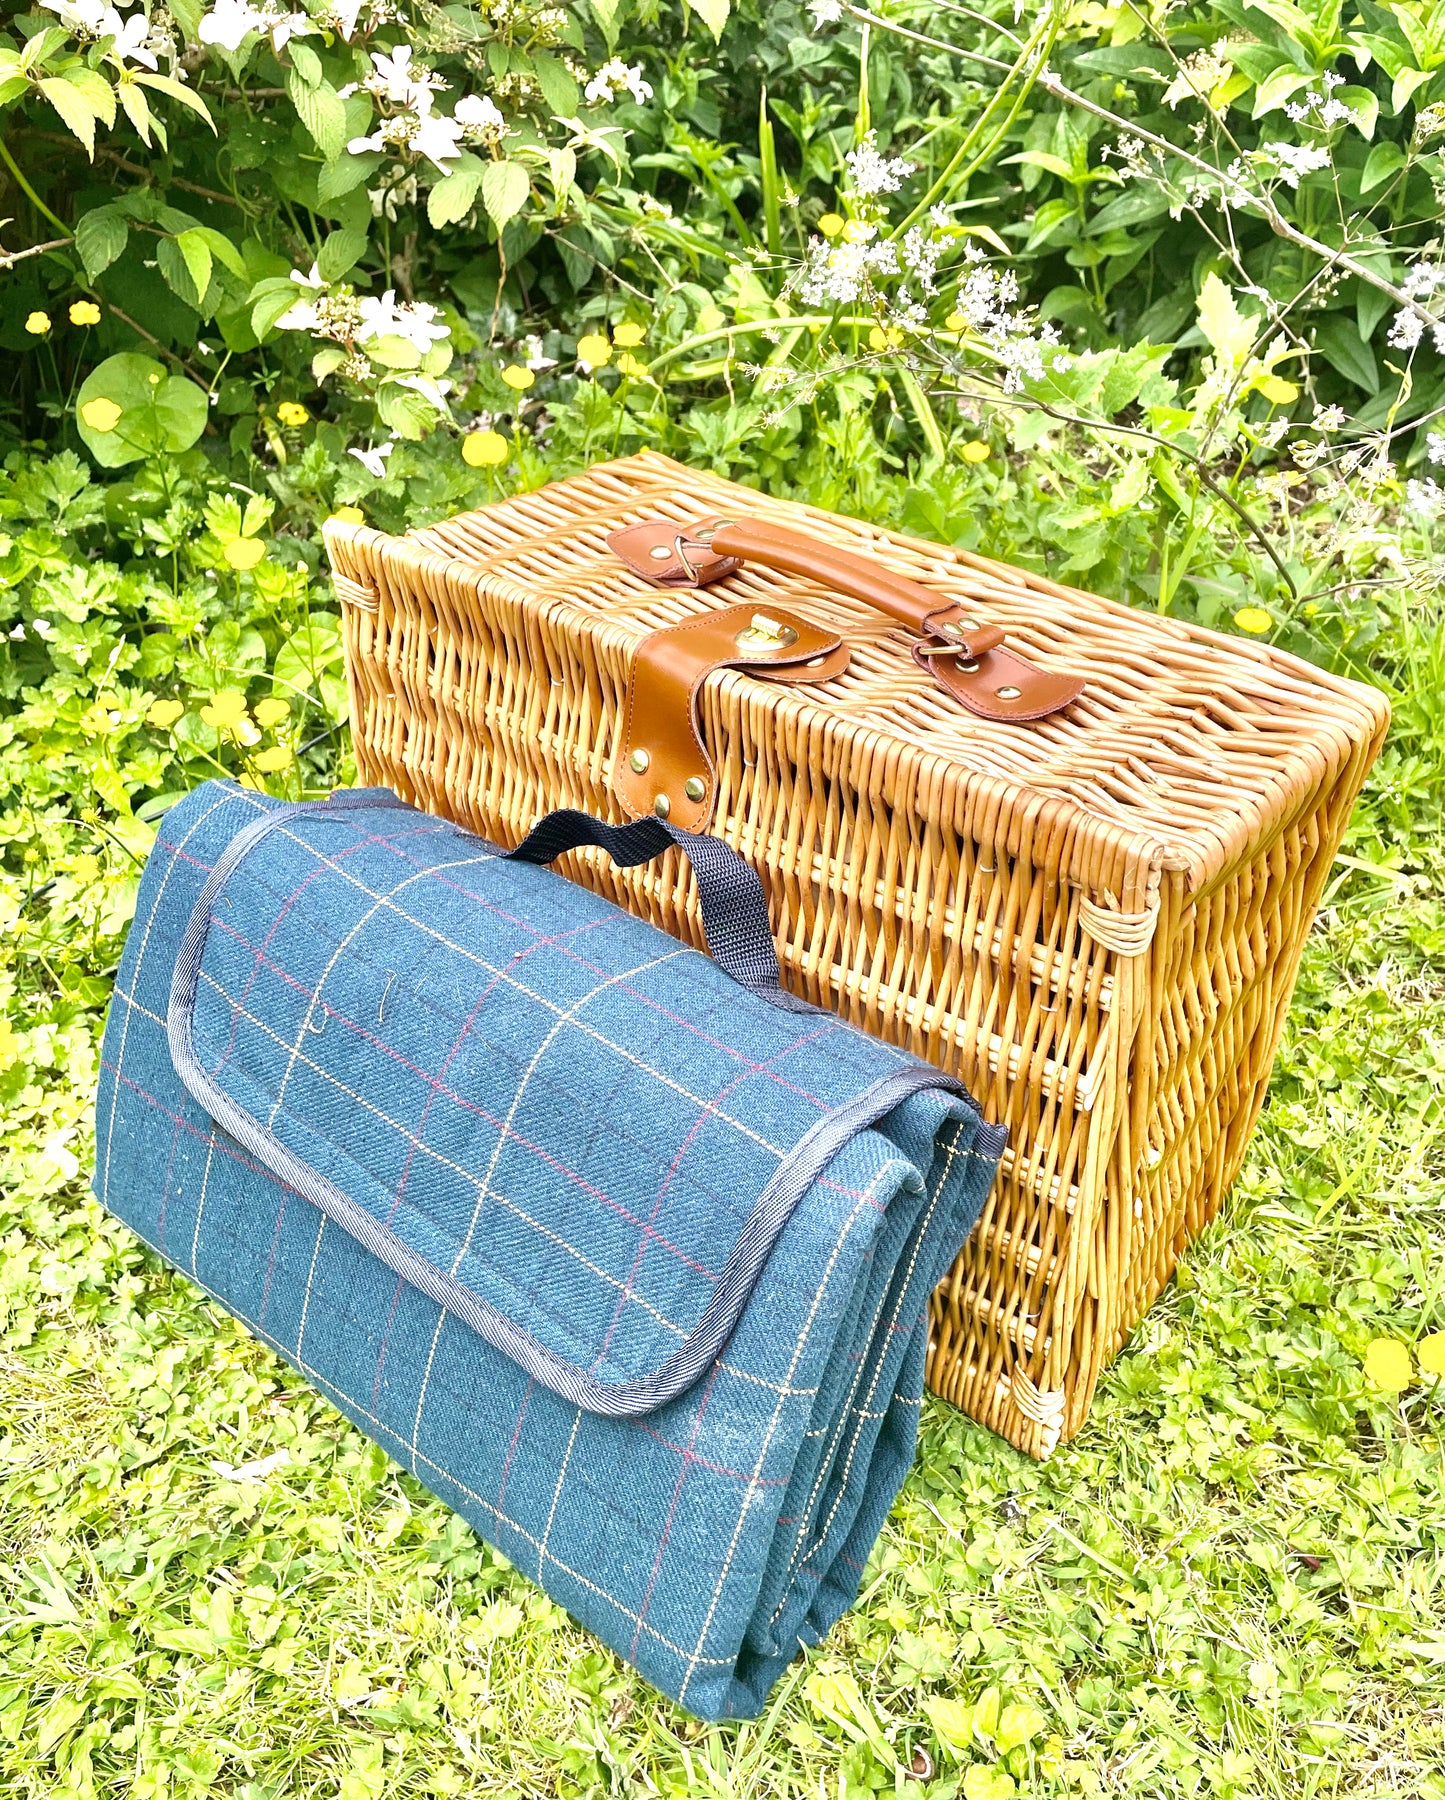 The Gainsborough leather trimmed afternoon tea  picnic hamper for 2